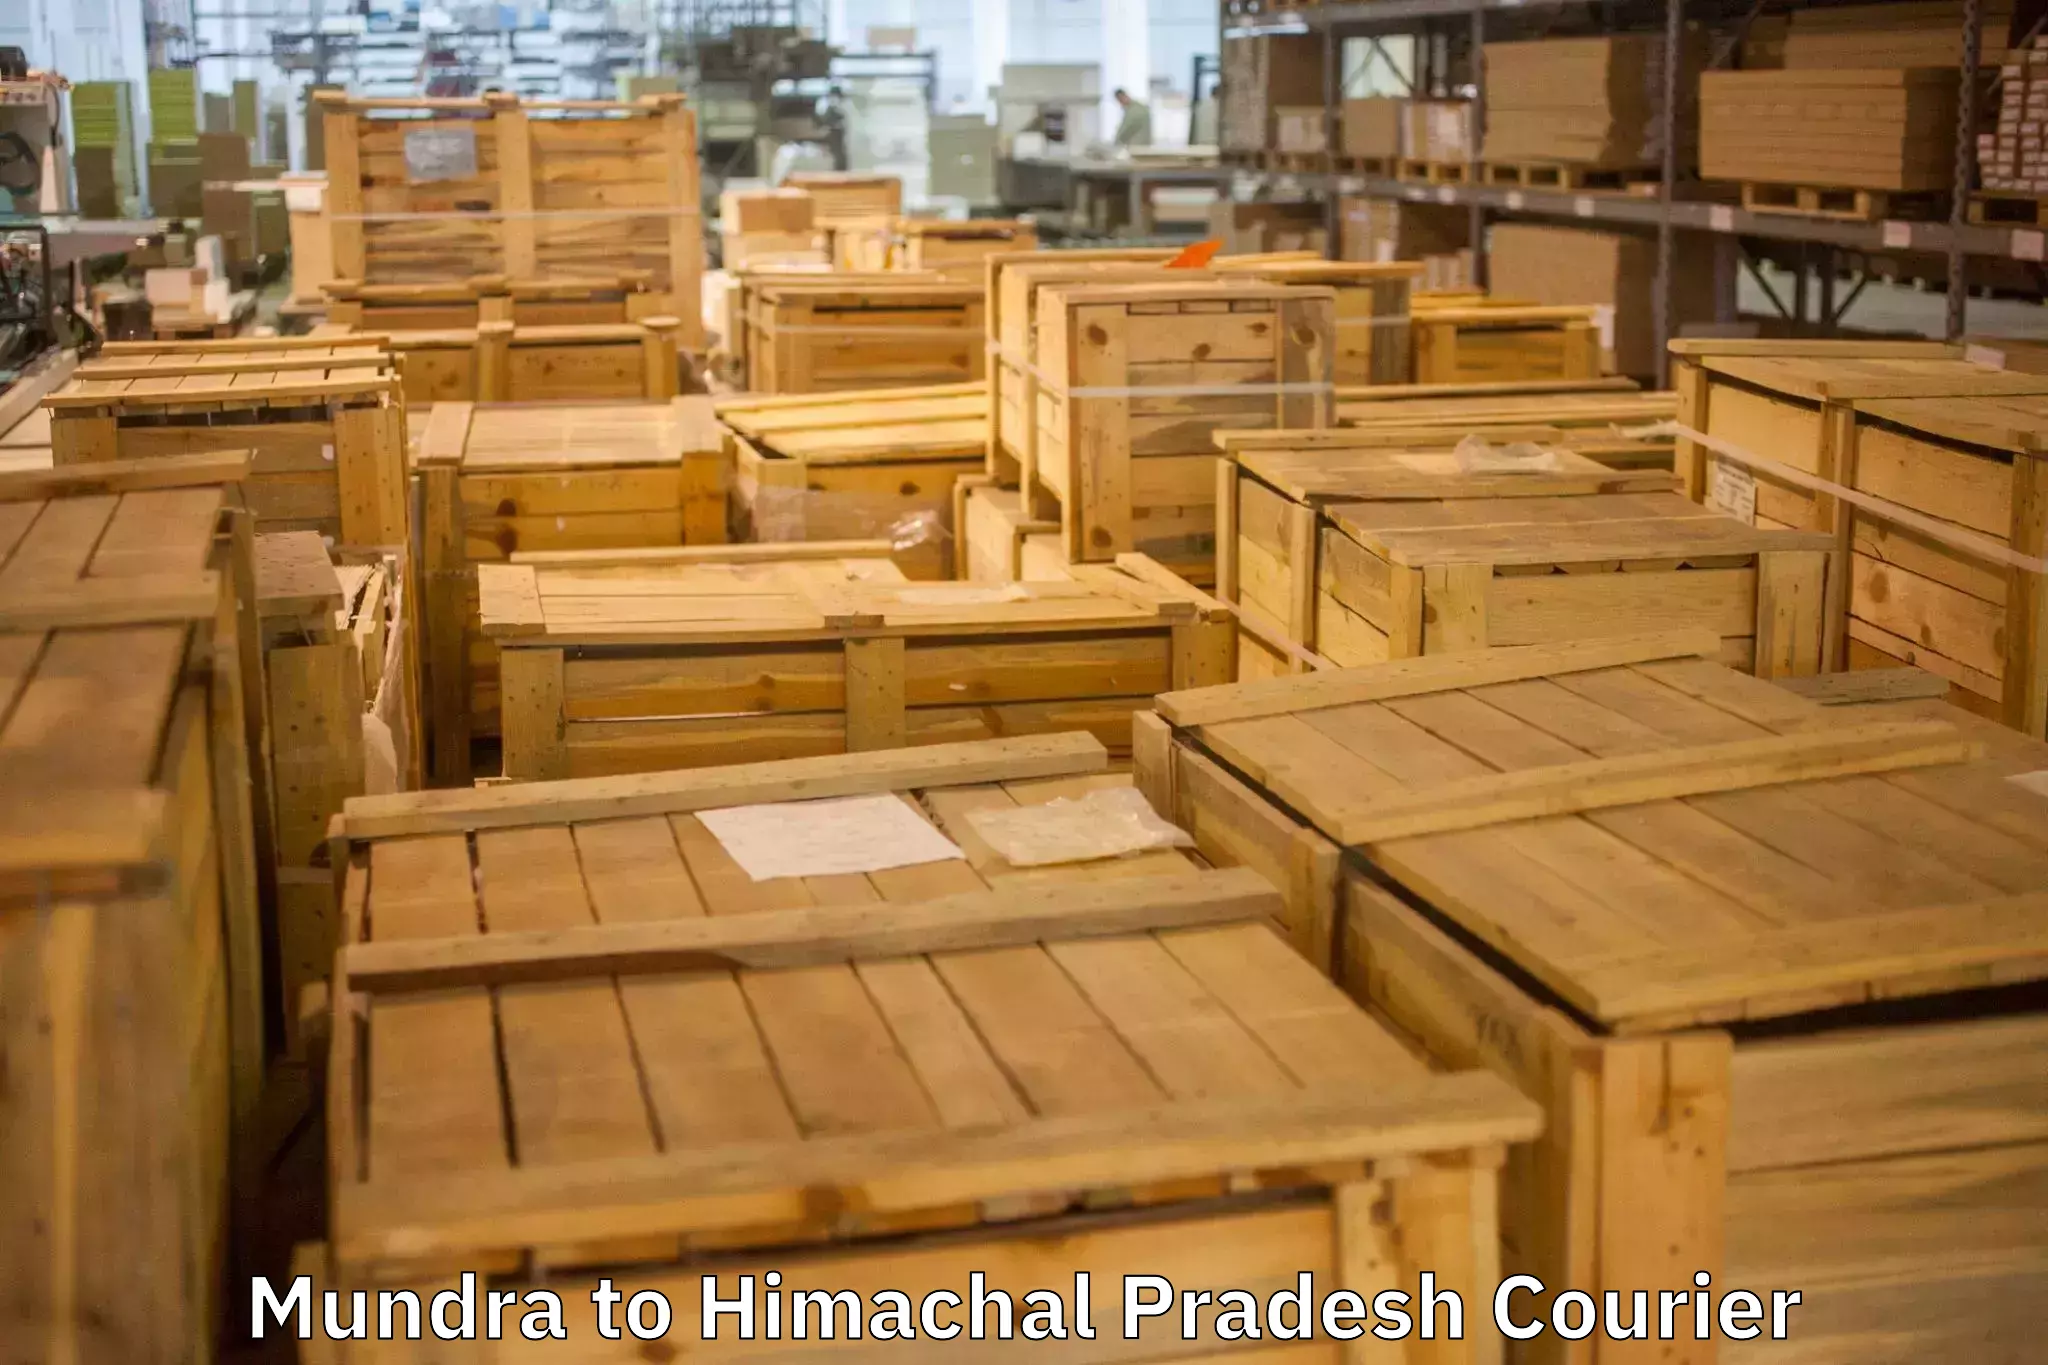 Professional packing services Mundra to Himachal Pradesh